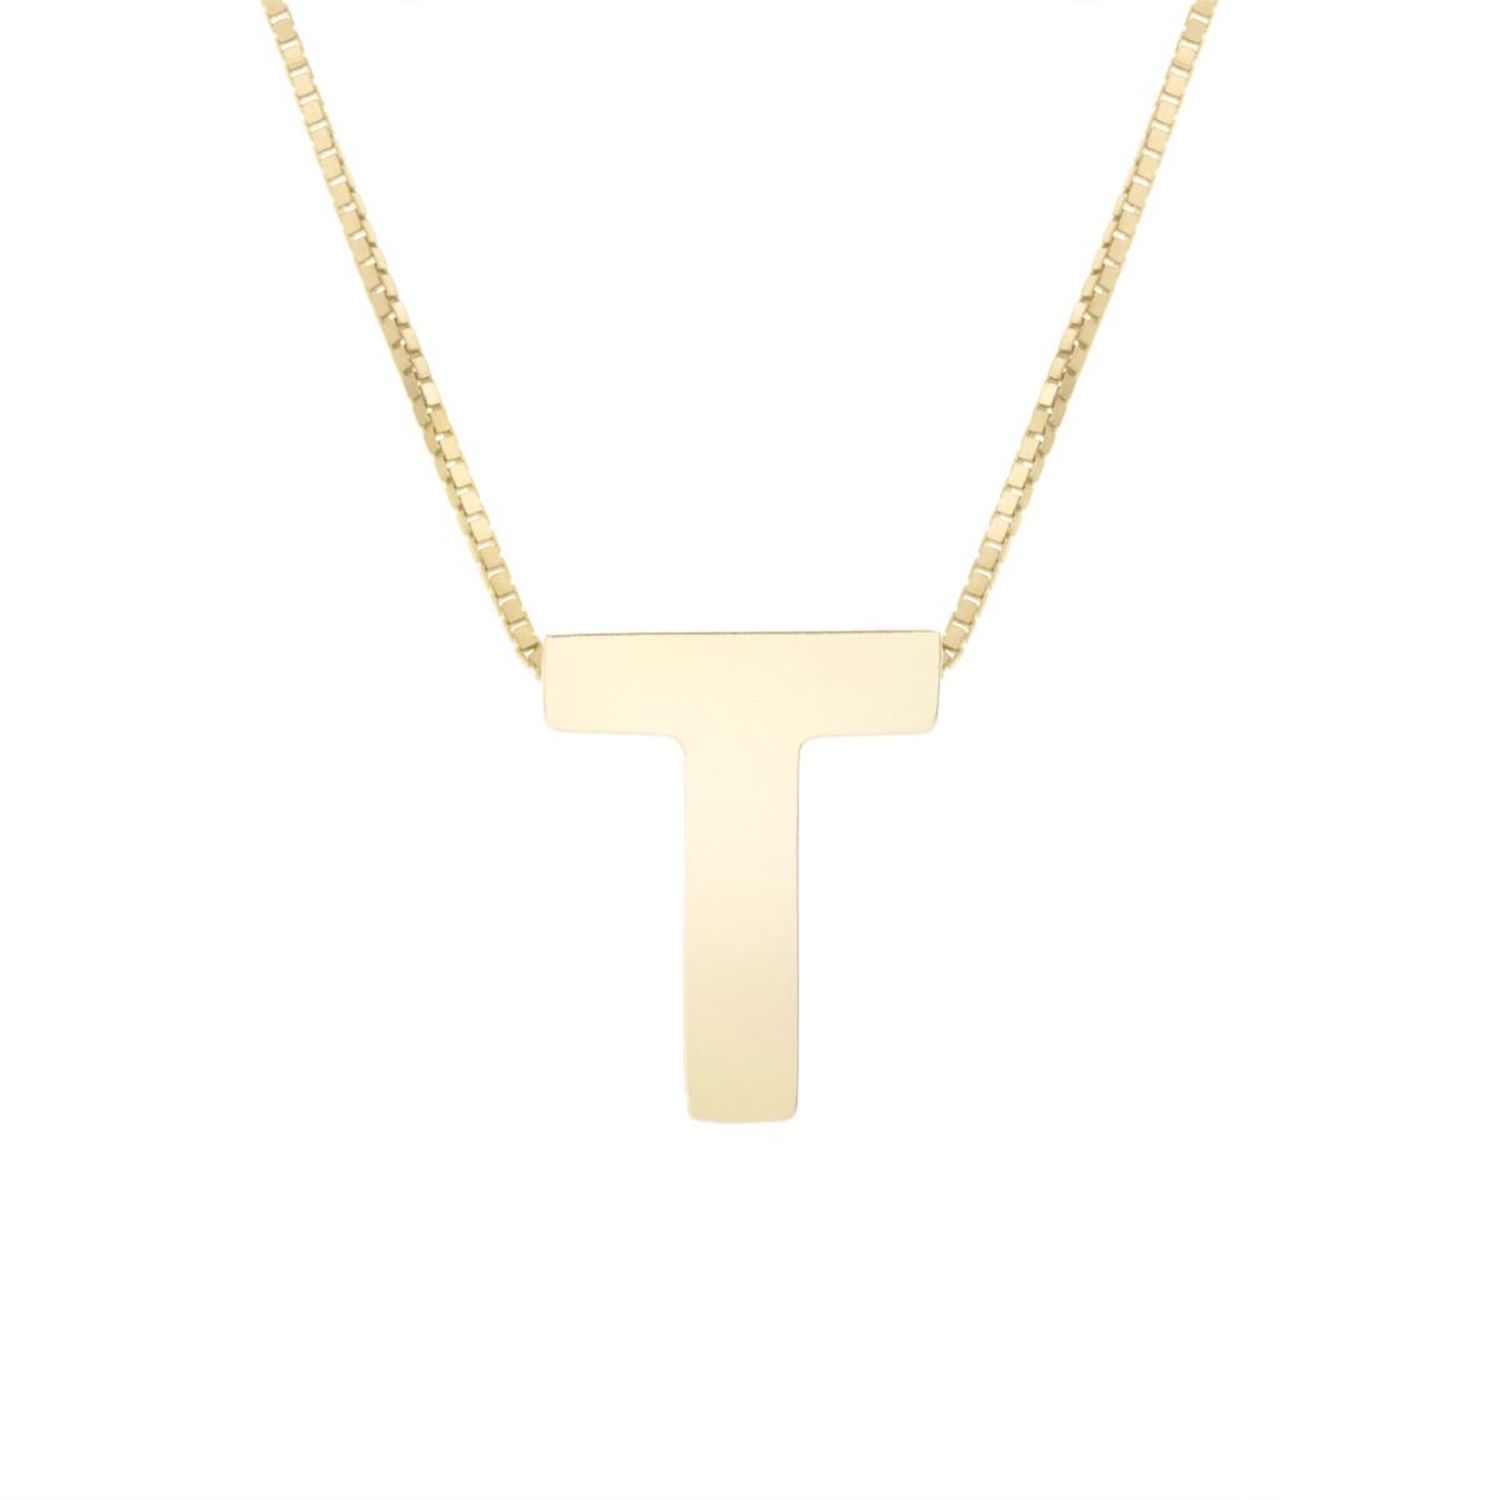 14K Yellow Gold Block Letter Initial Pendant Box Chain Necklace 16"-18" - T